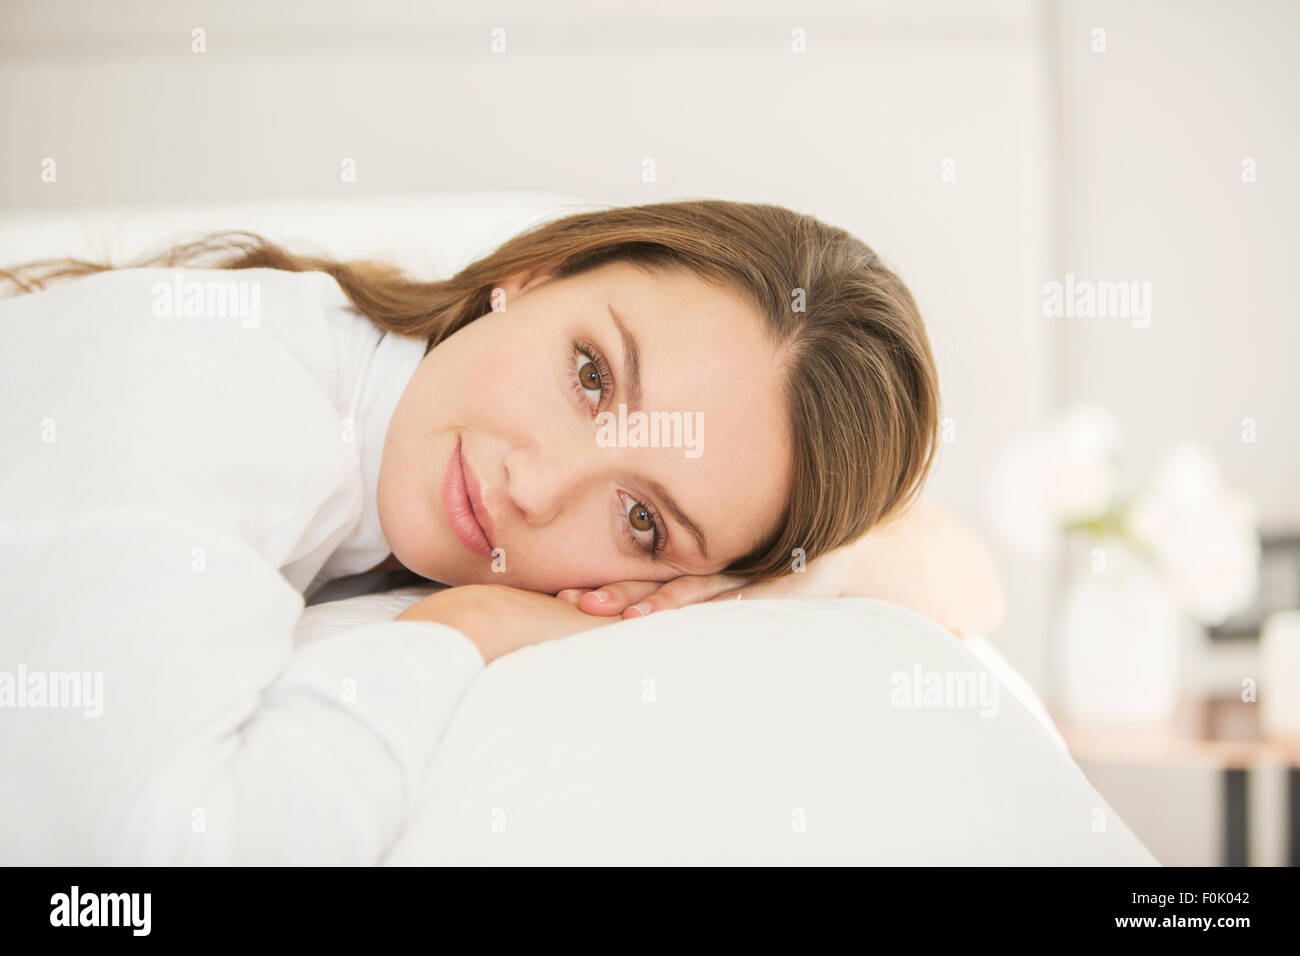 Sereine Portrait woman laying on bed Banque D'Images